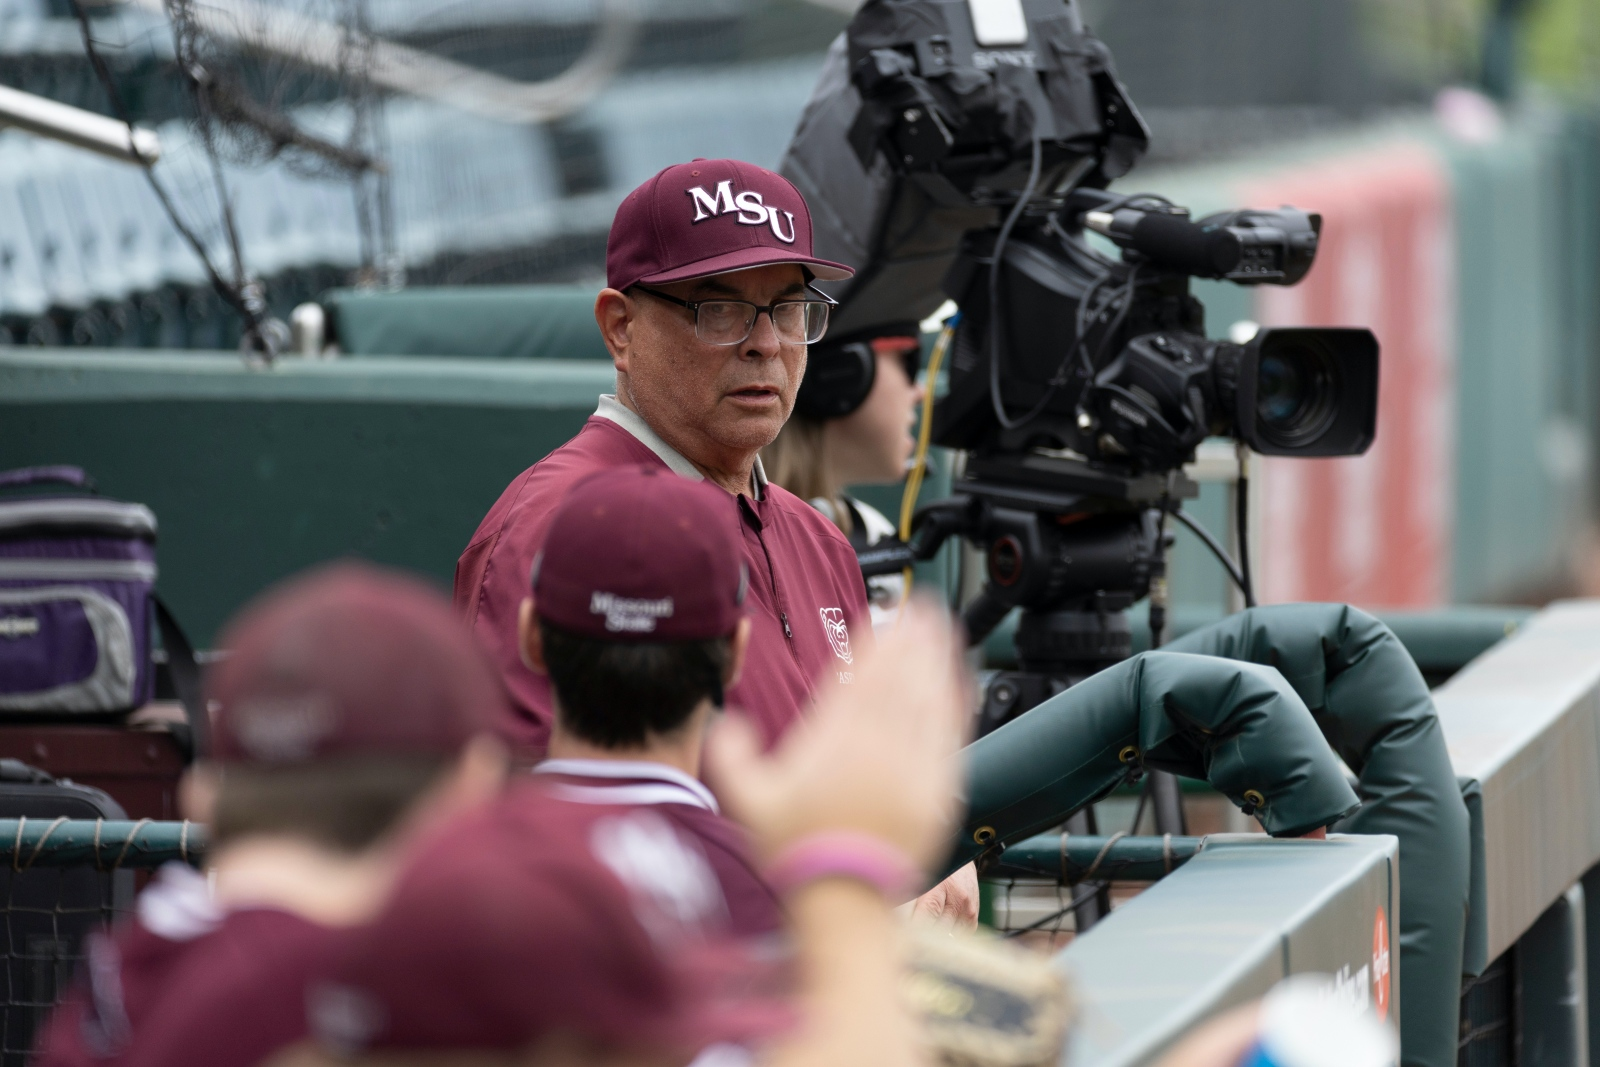 Keith Guttin, wearing a Missouri State baseball uniform, stands in the dugout during a game at Hammons Field.